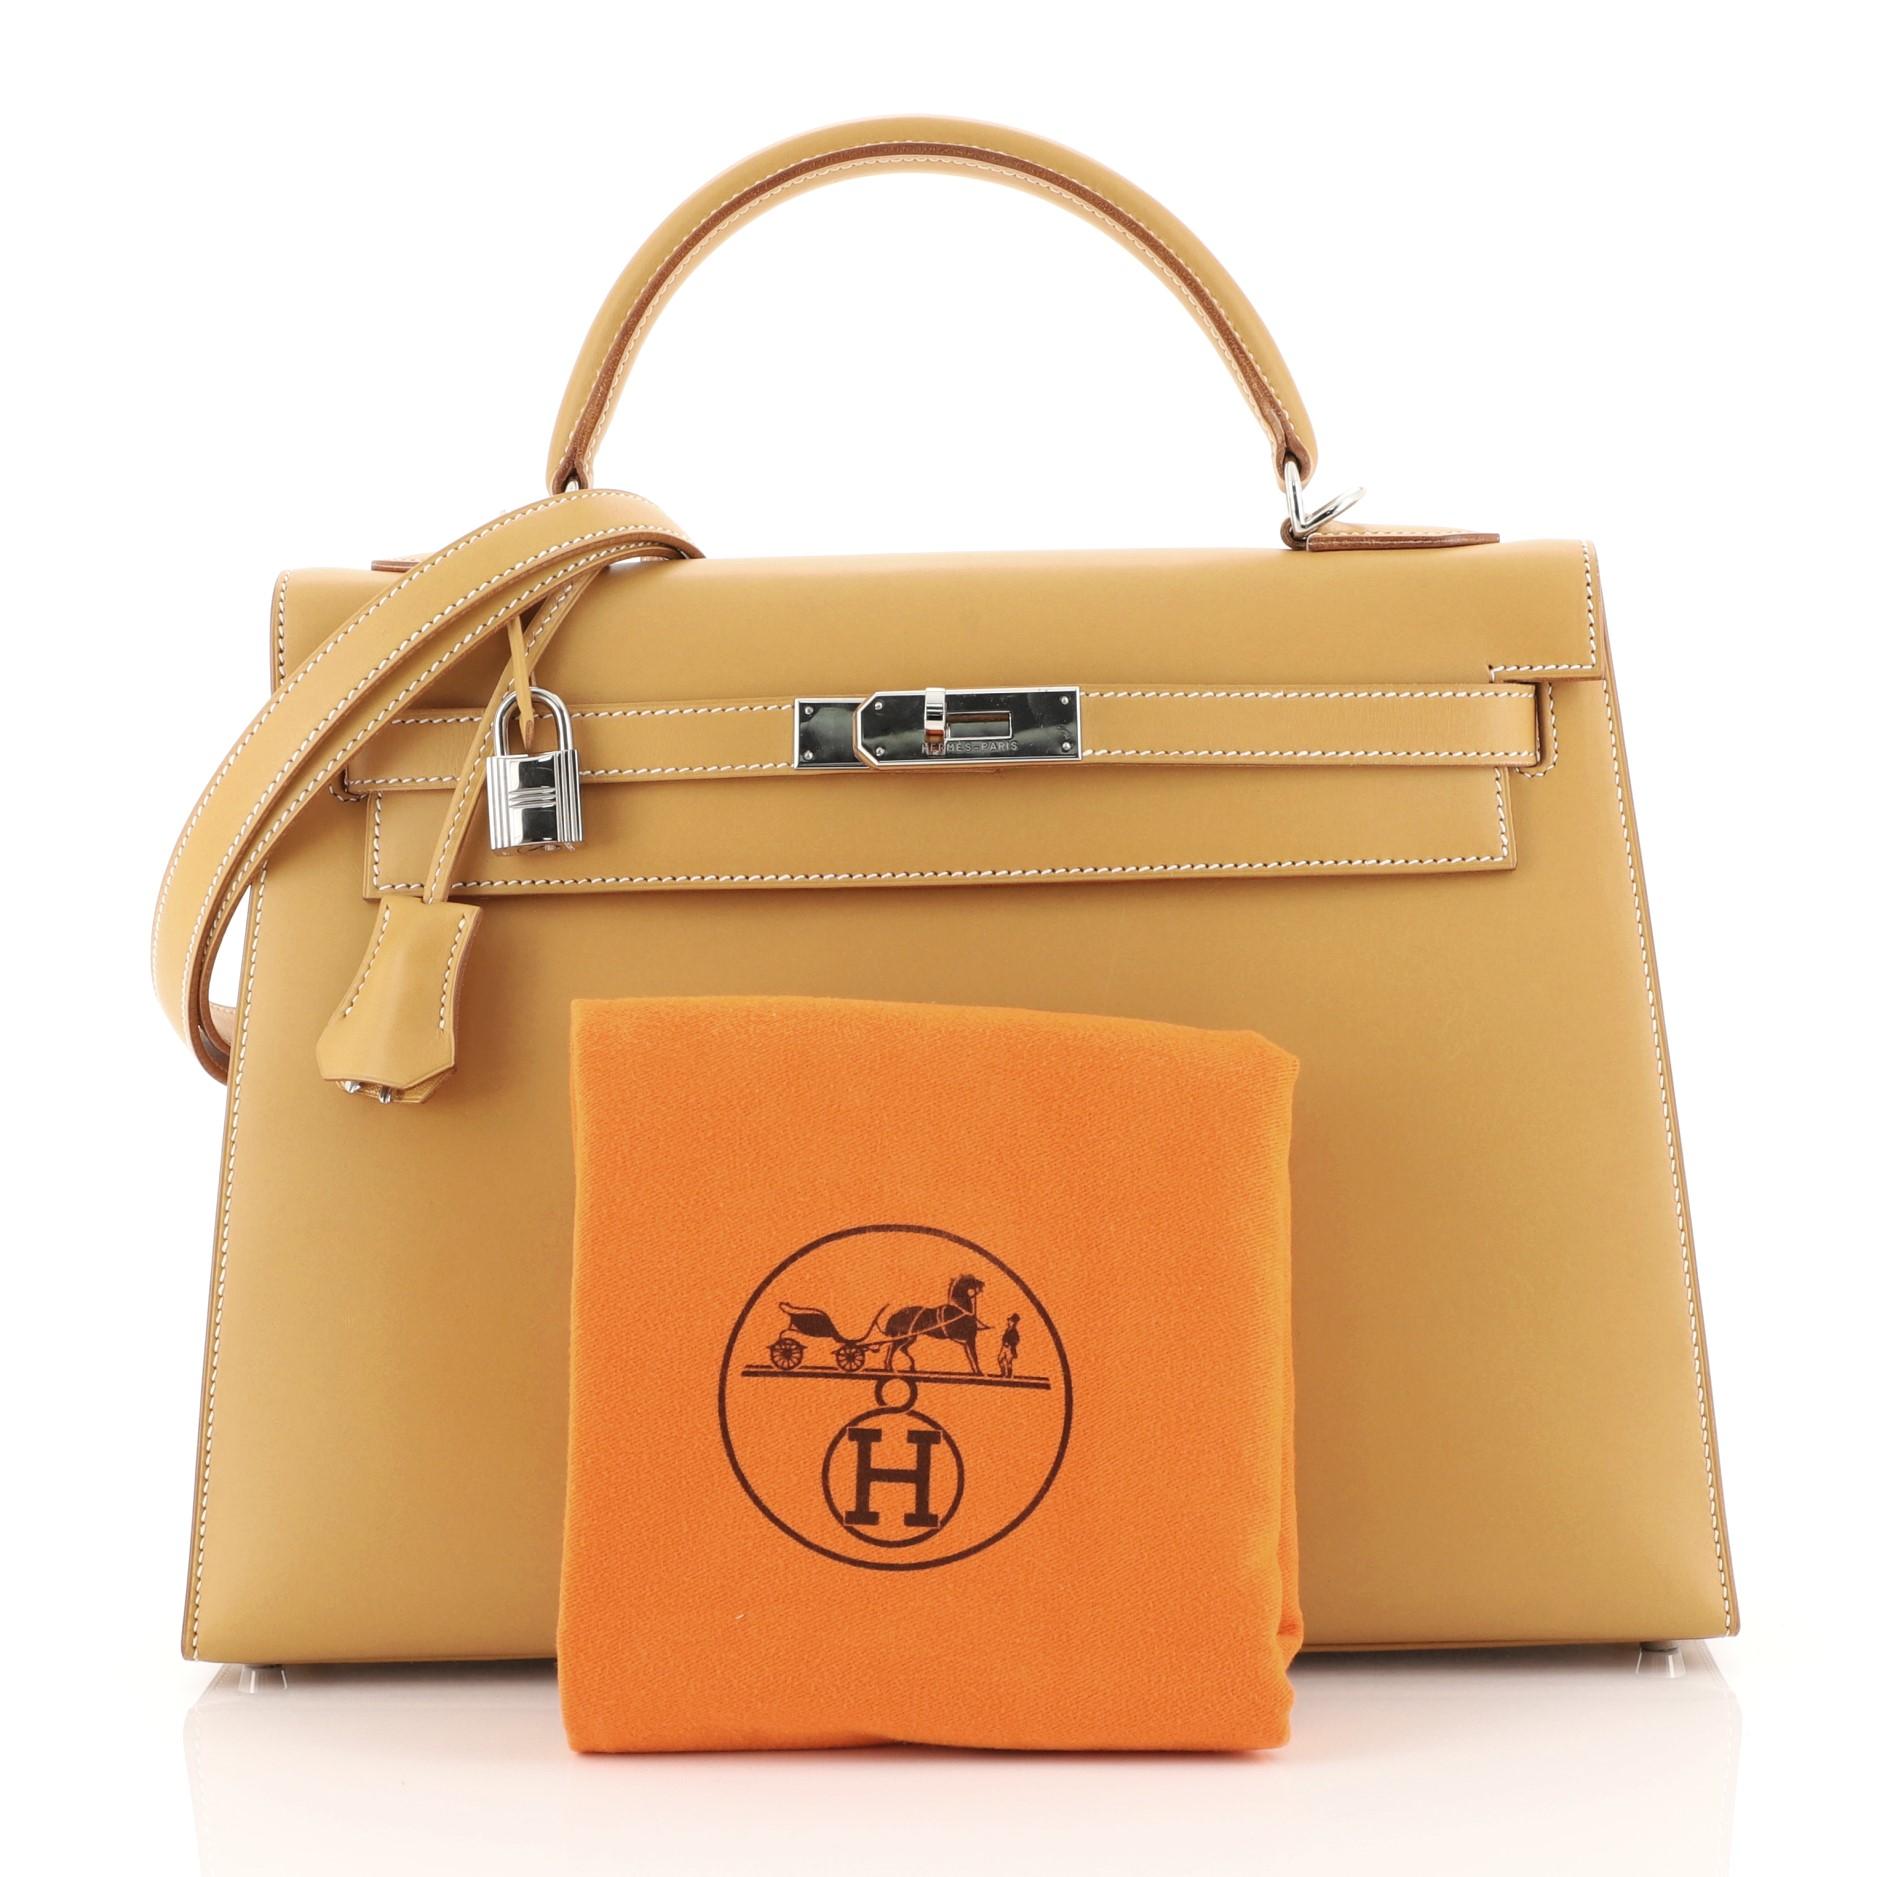 This Hermes Kelly Handbag Natural Chamonix with Palladium Hardware 32, crafted in Natural brown Chamonix leather, features a rolled top handle, protective base studs, and palladium hardware. Its turn-lock closure opens to a Natural brown Chevre